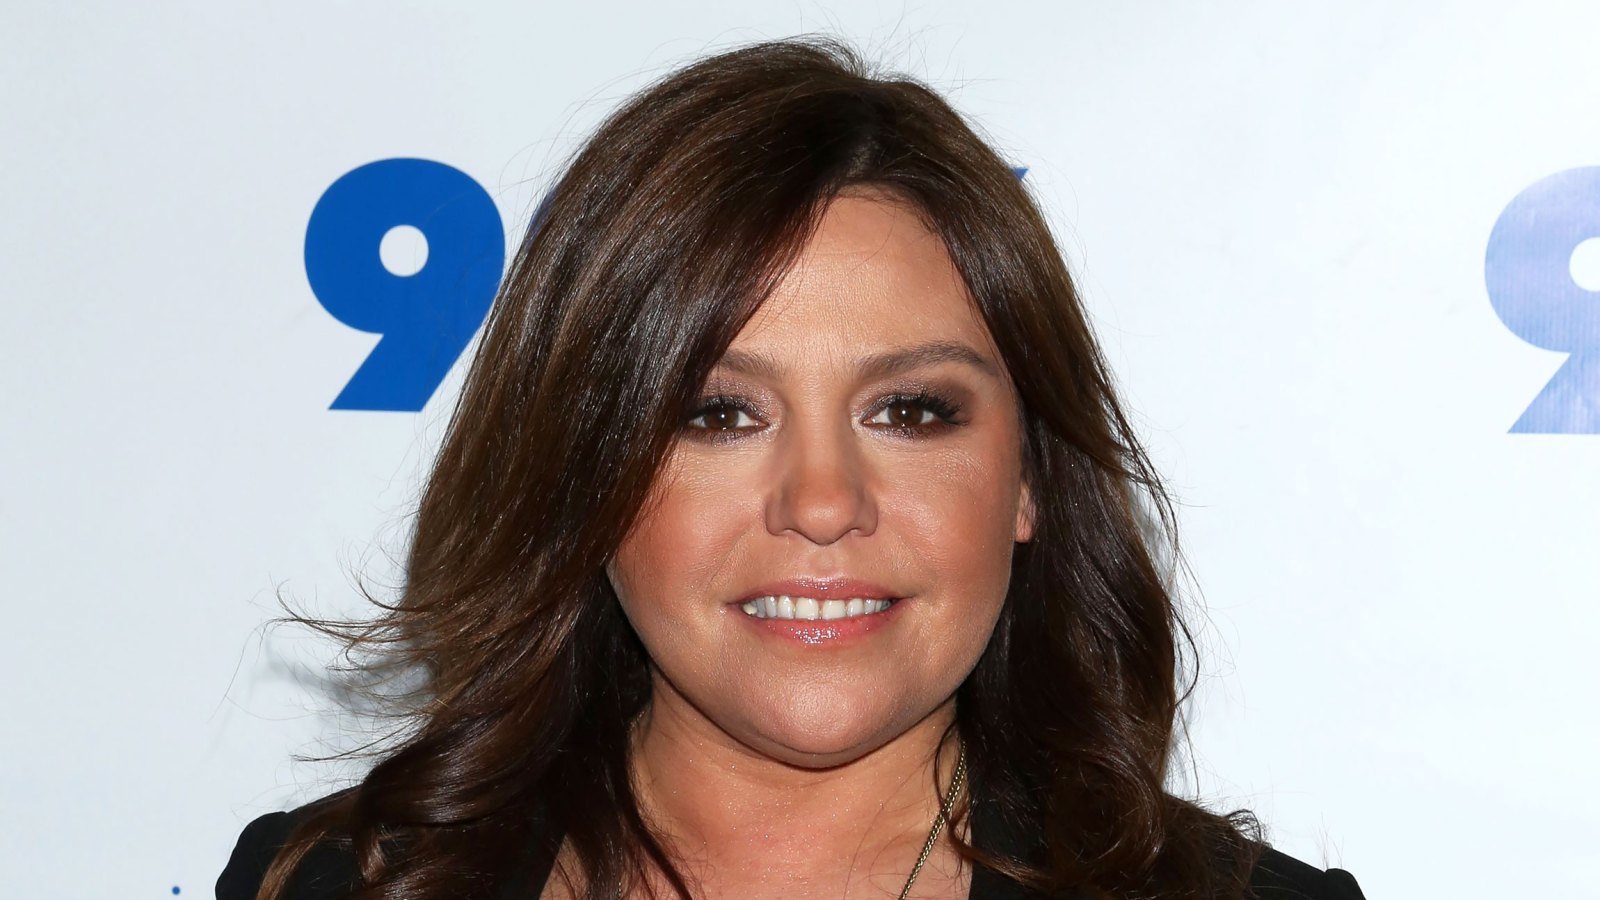 Rachael Ray Slams Reports of Unfair Treatment Toward Crew: They're 'Family'